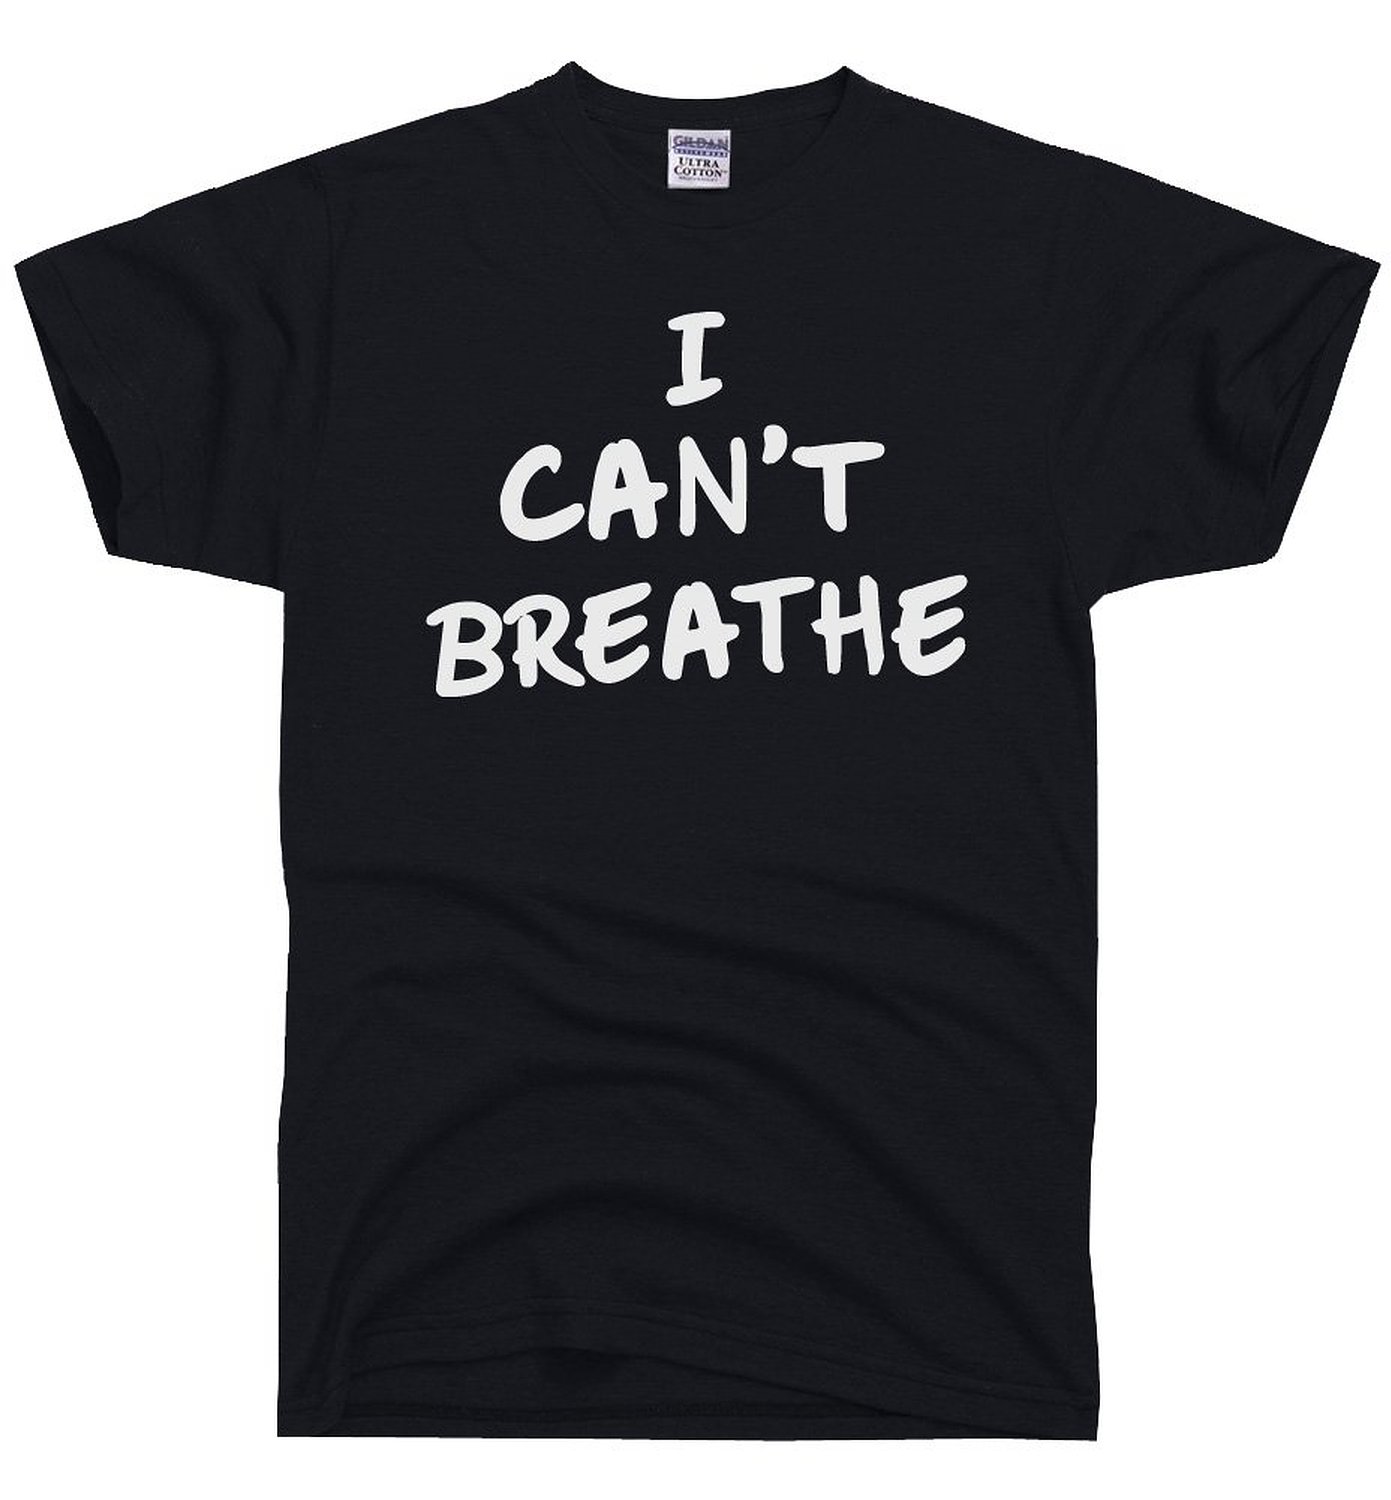 Lesson Learned: High School Hoops Team Disinvited From Tournament Over ‘I Can’t Breathe’ Shirts